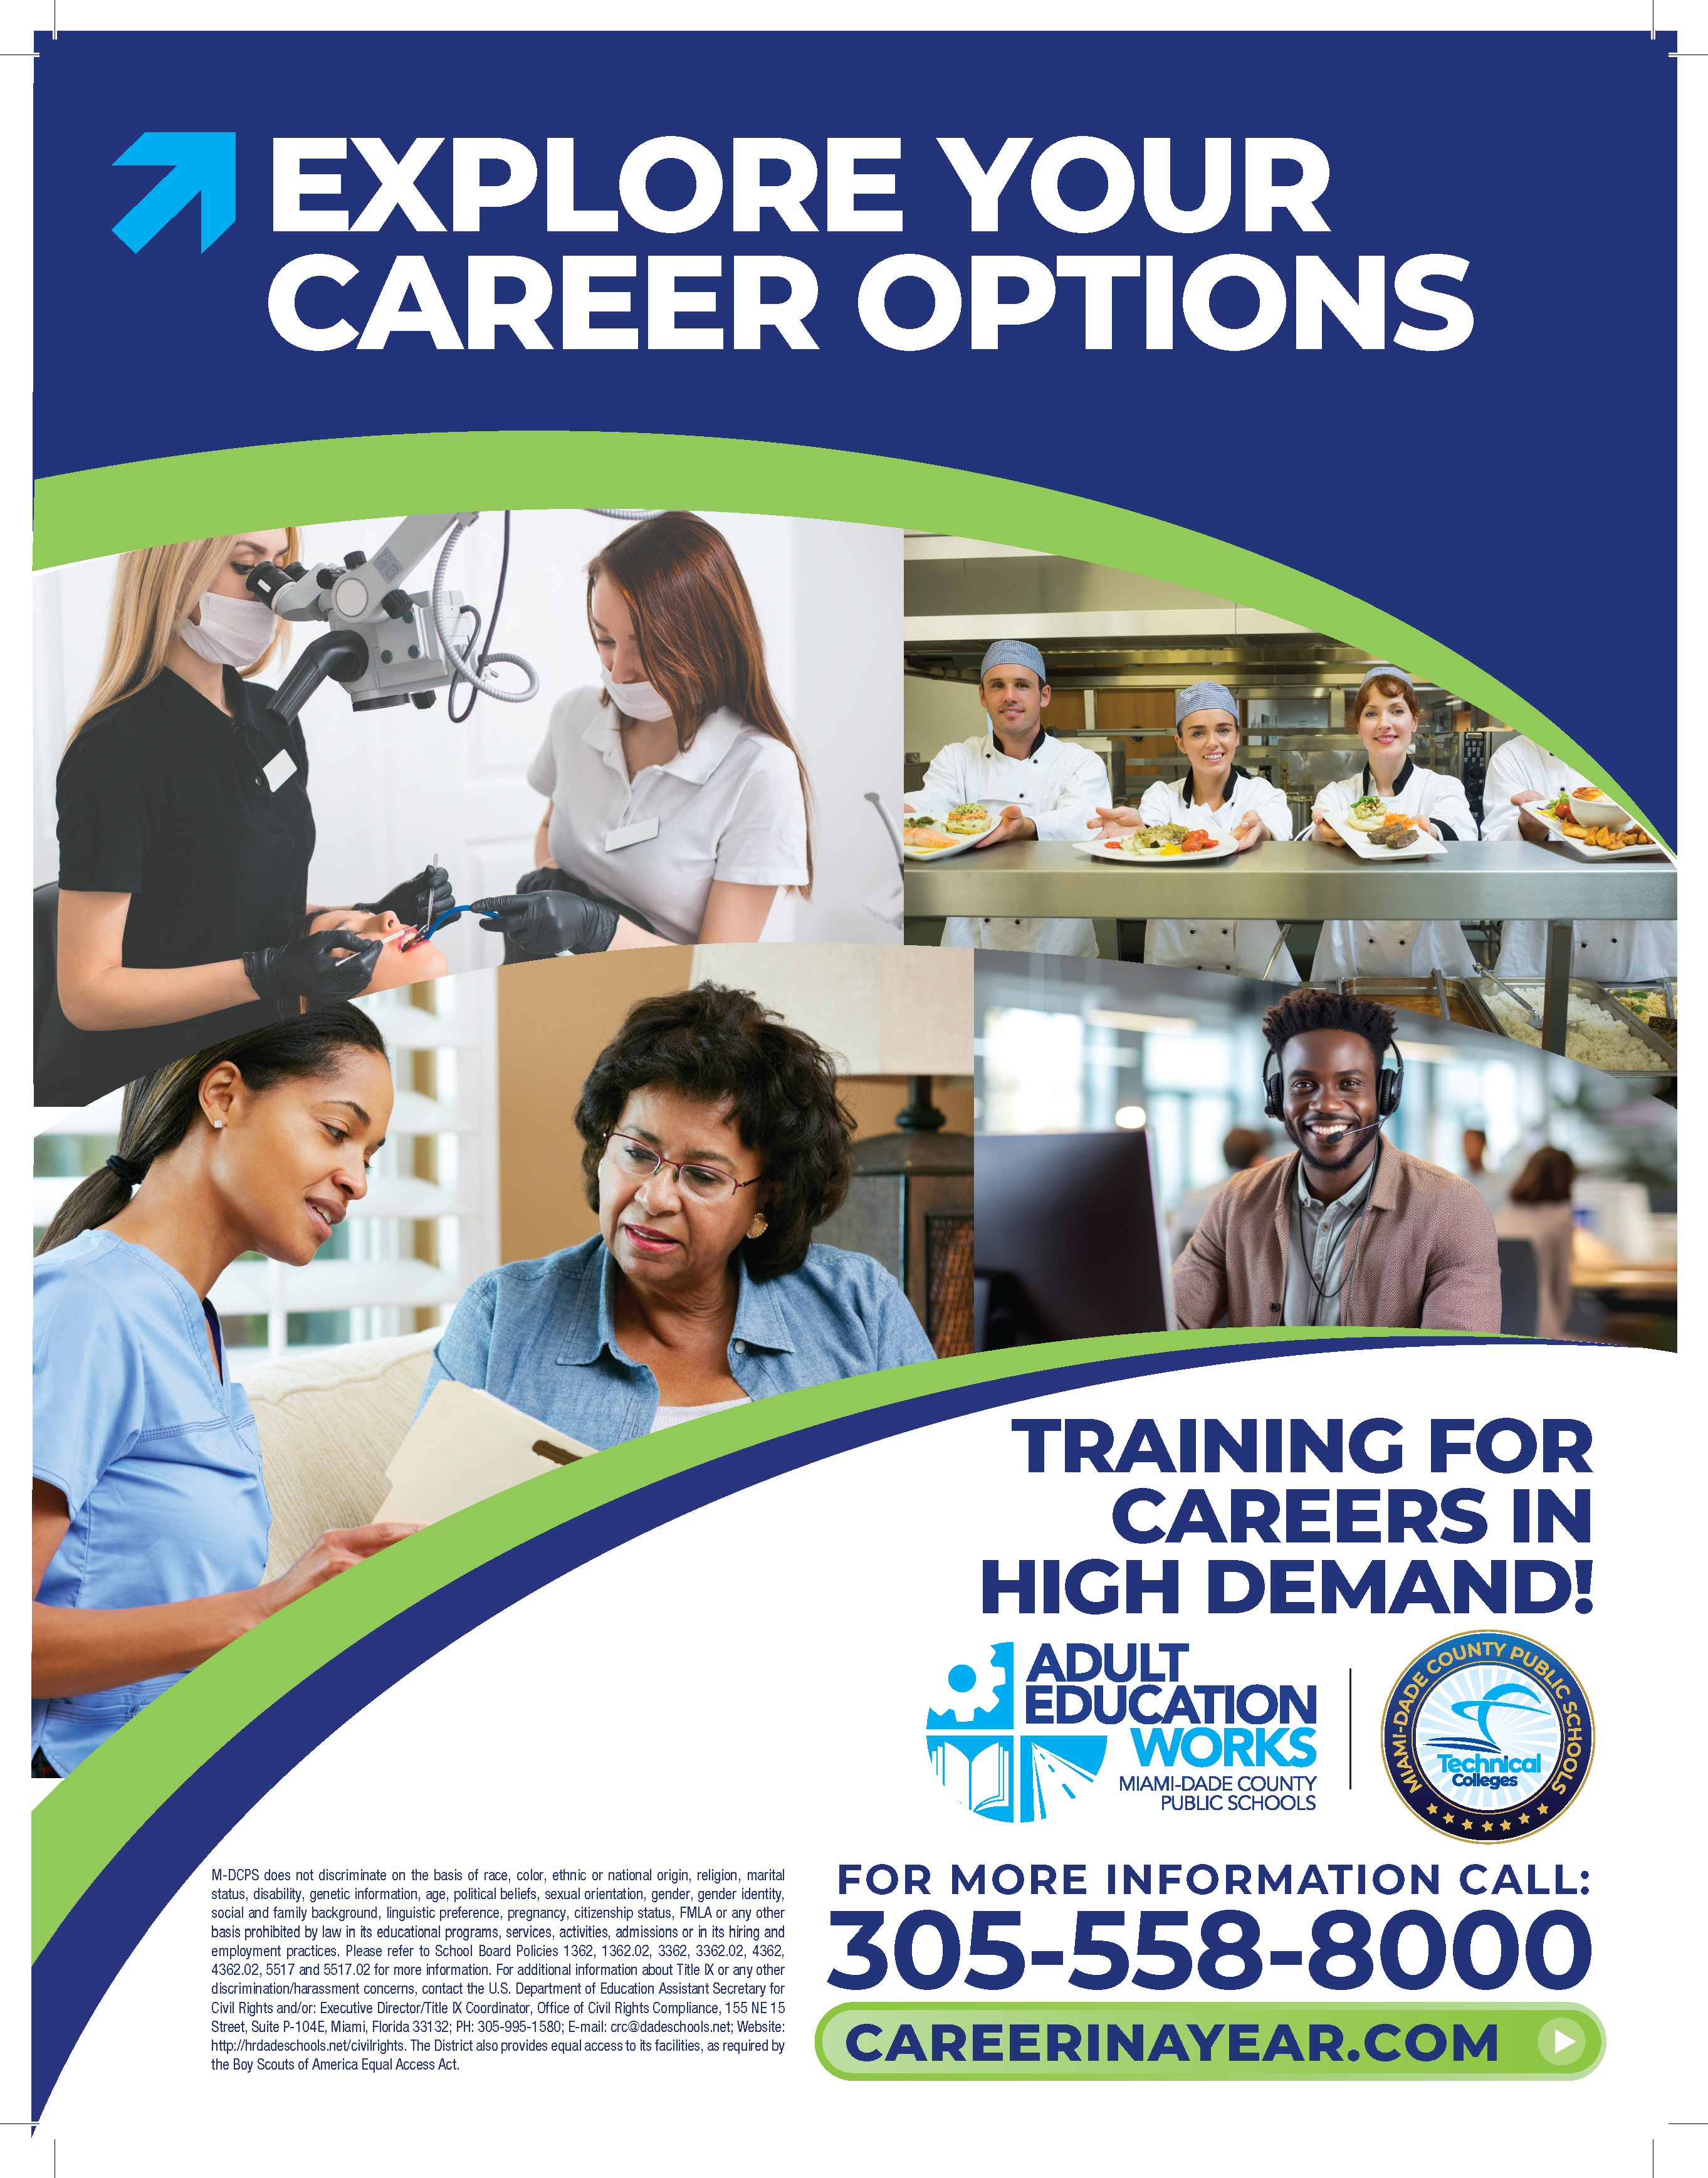 Training for Careers in High Demand